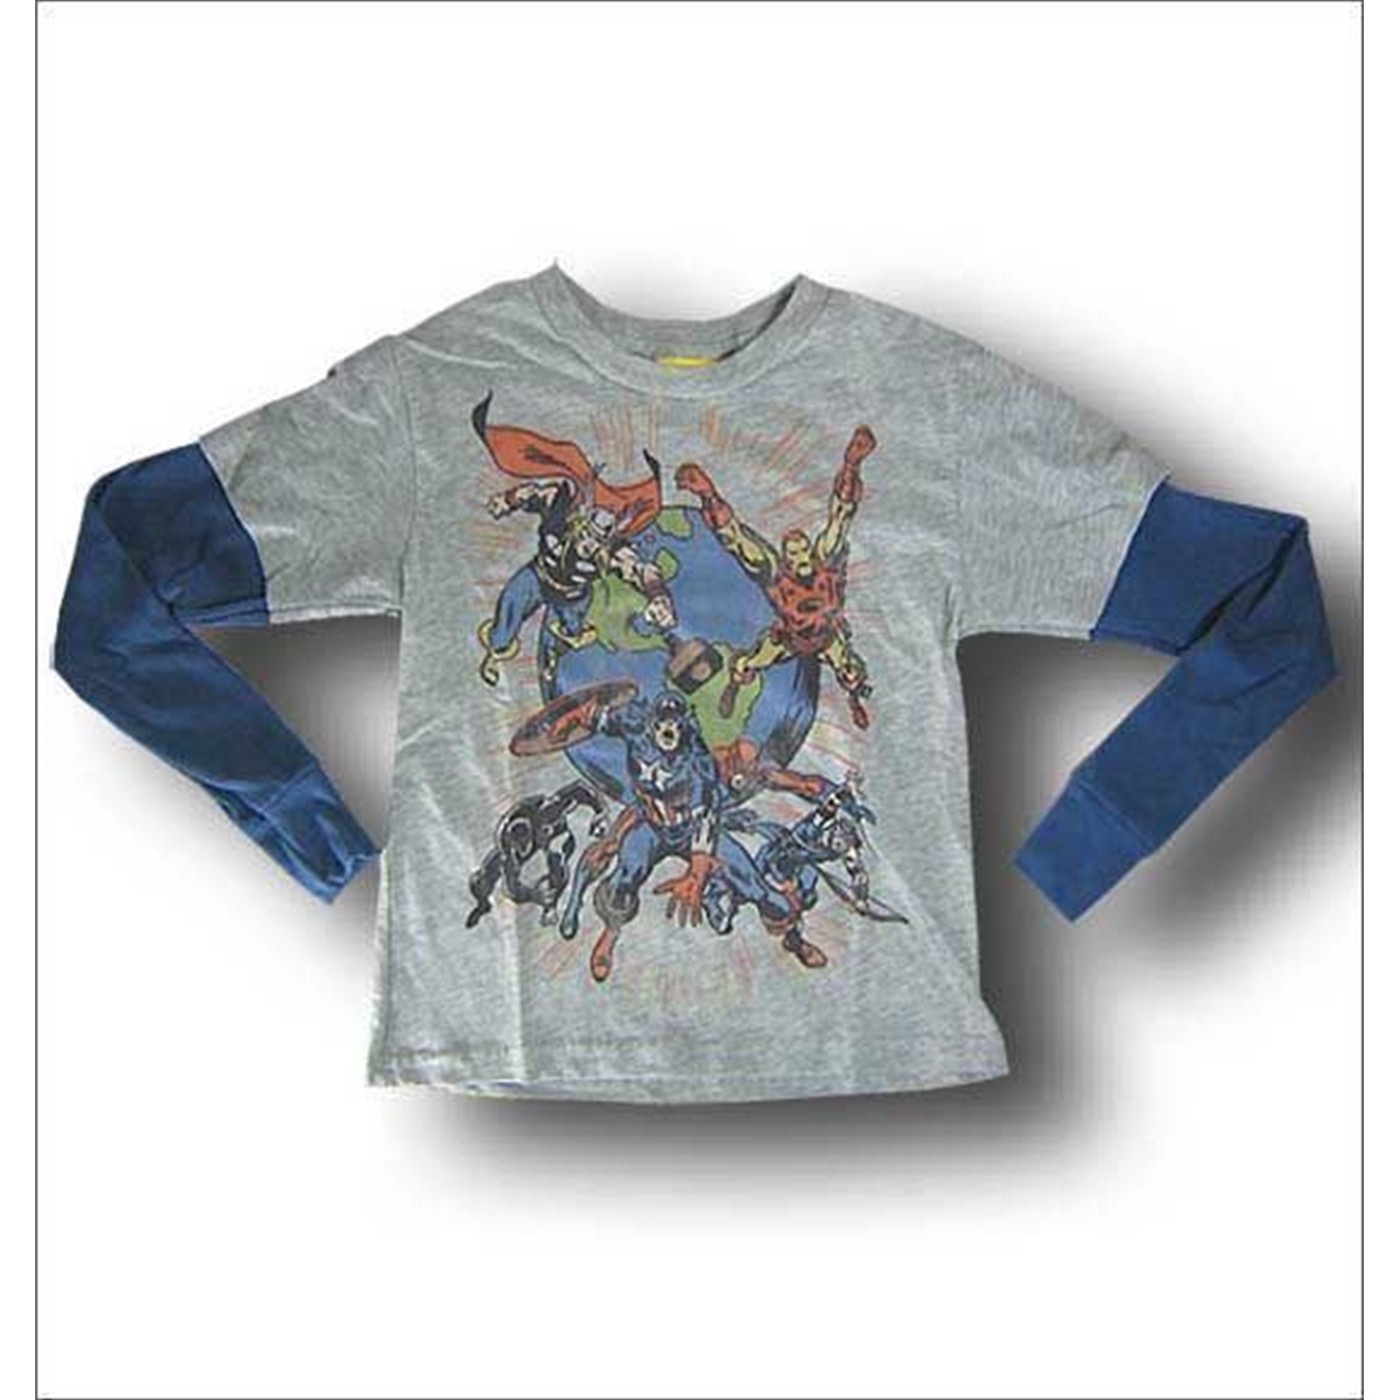 Avengers Double Sleeve Juvenile T-Shirt by Junk Food